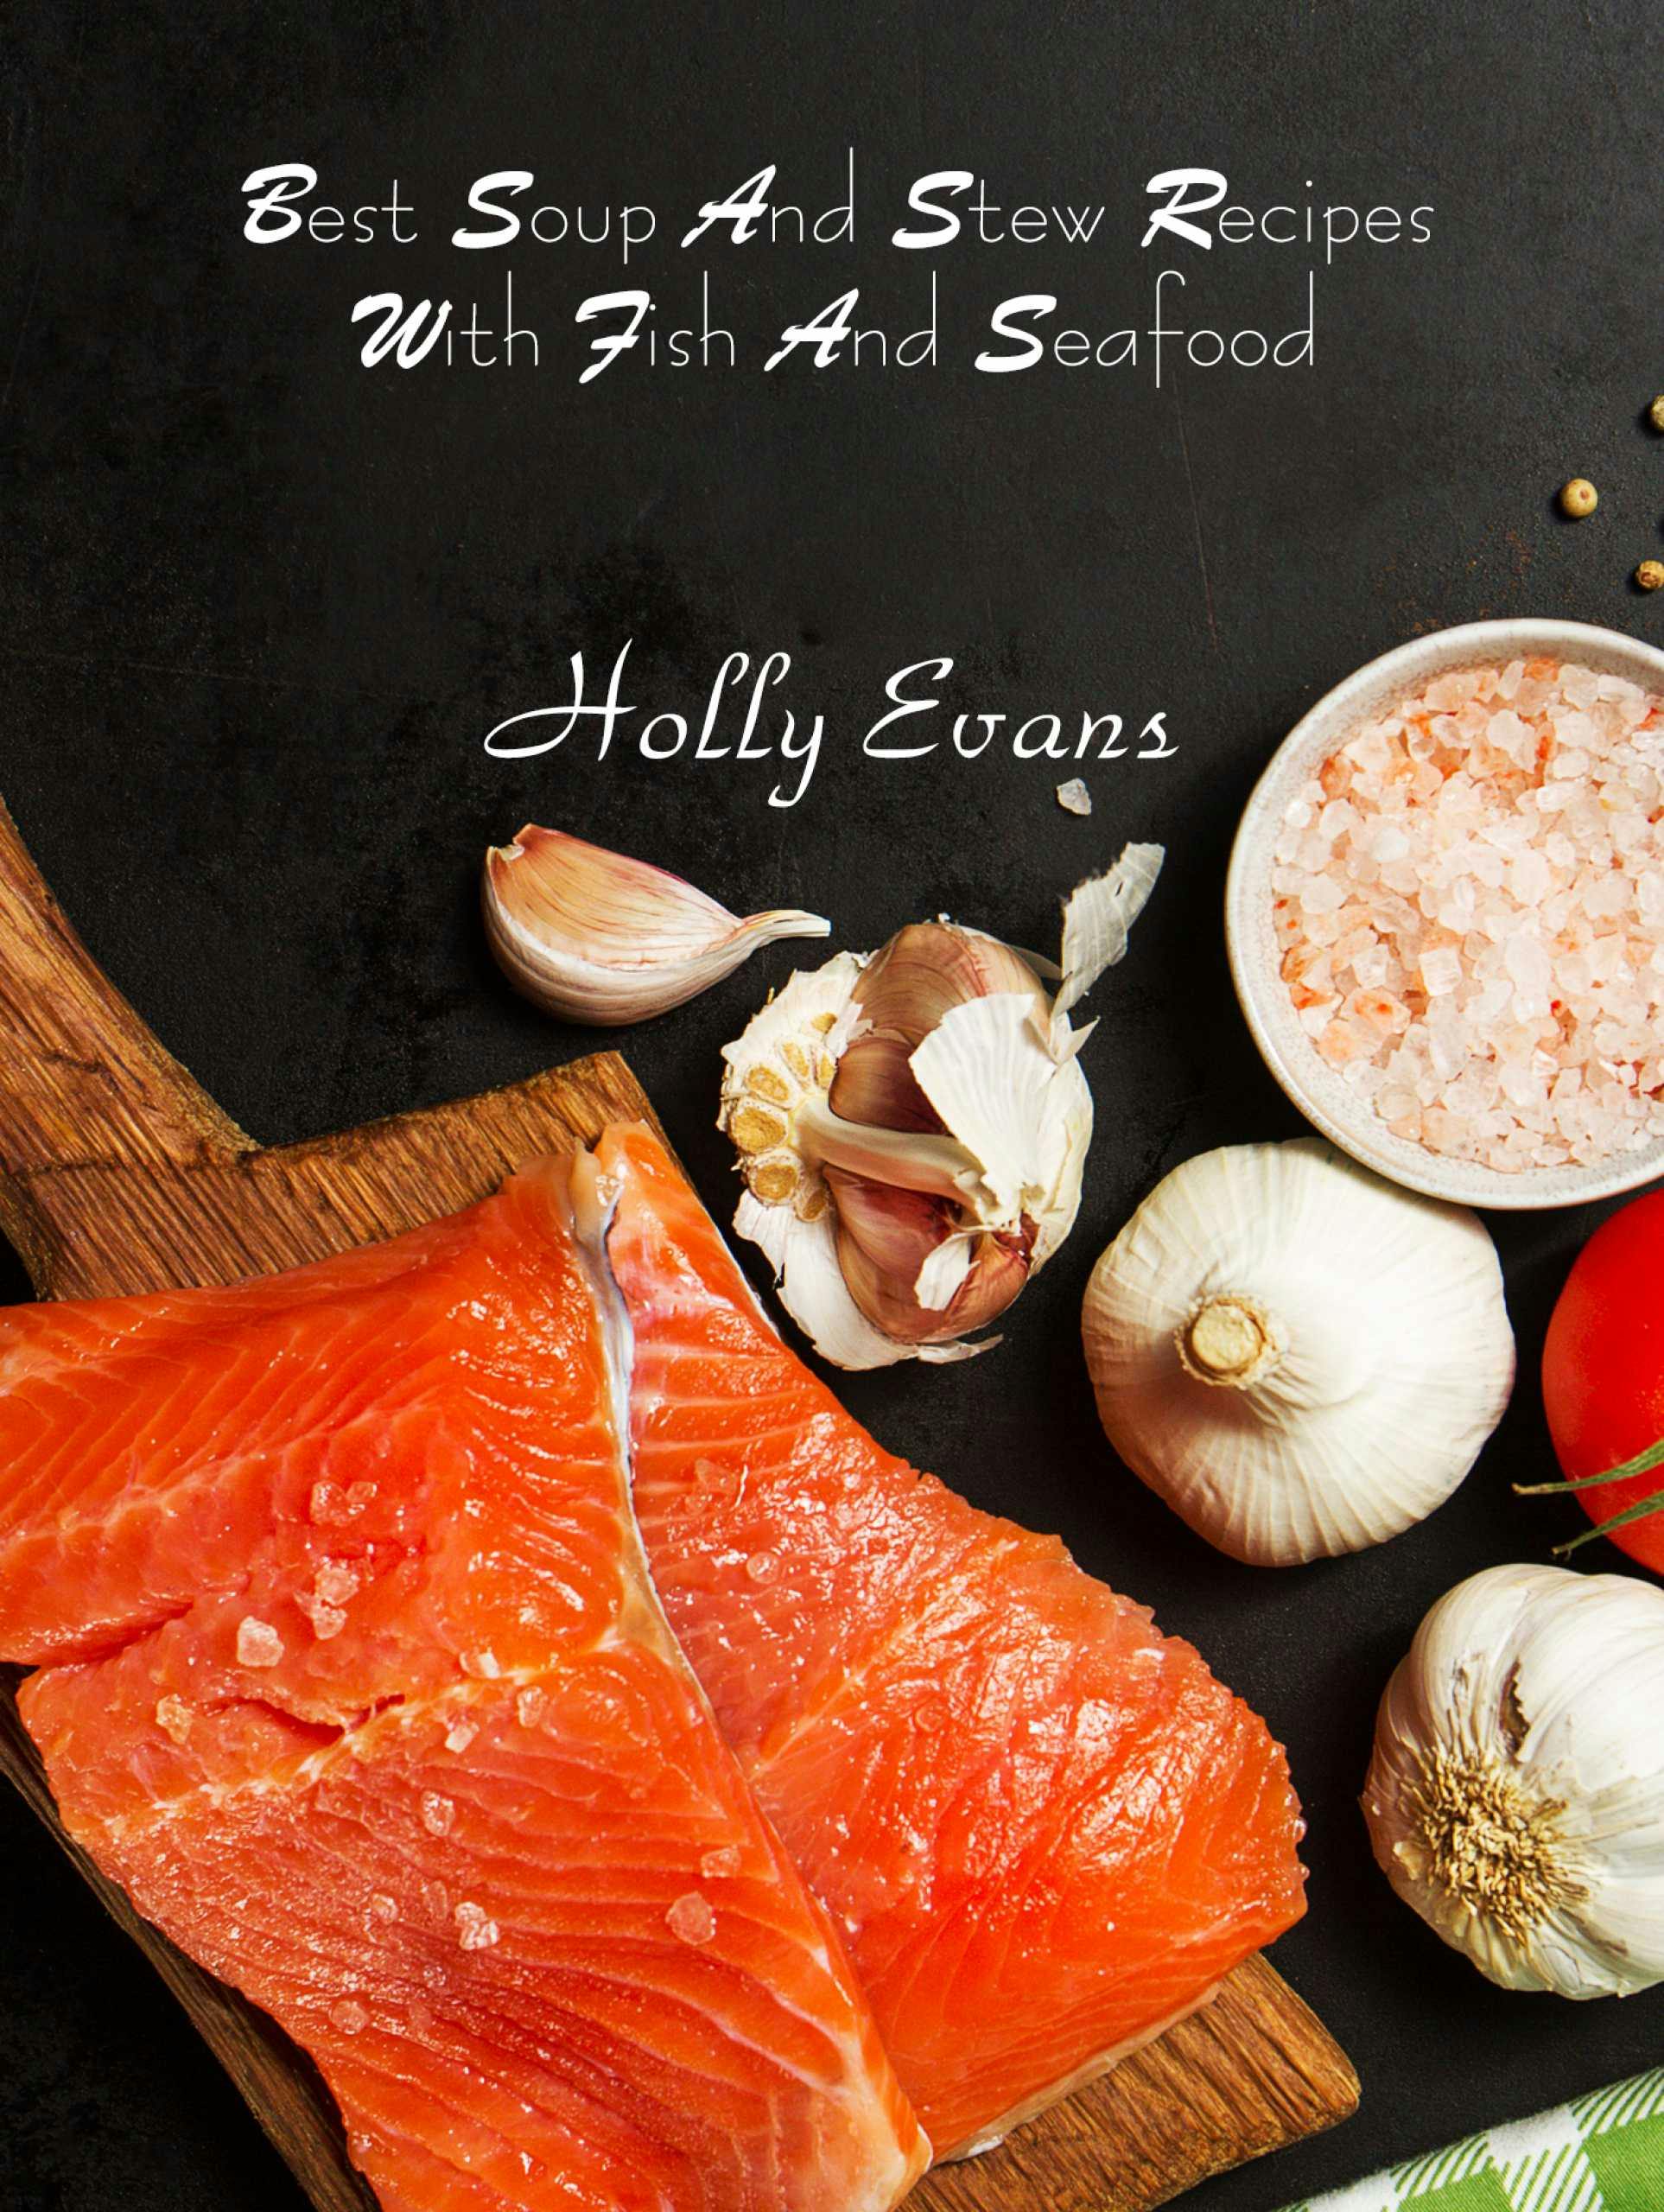 Best Soup And Stew Recipes With Fish And Seafood - Holly Evans